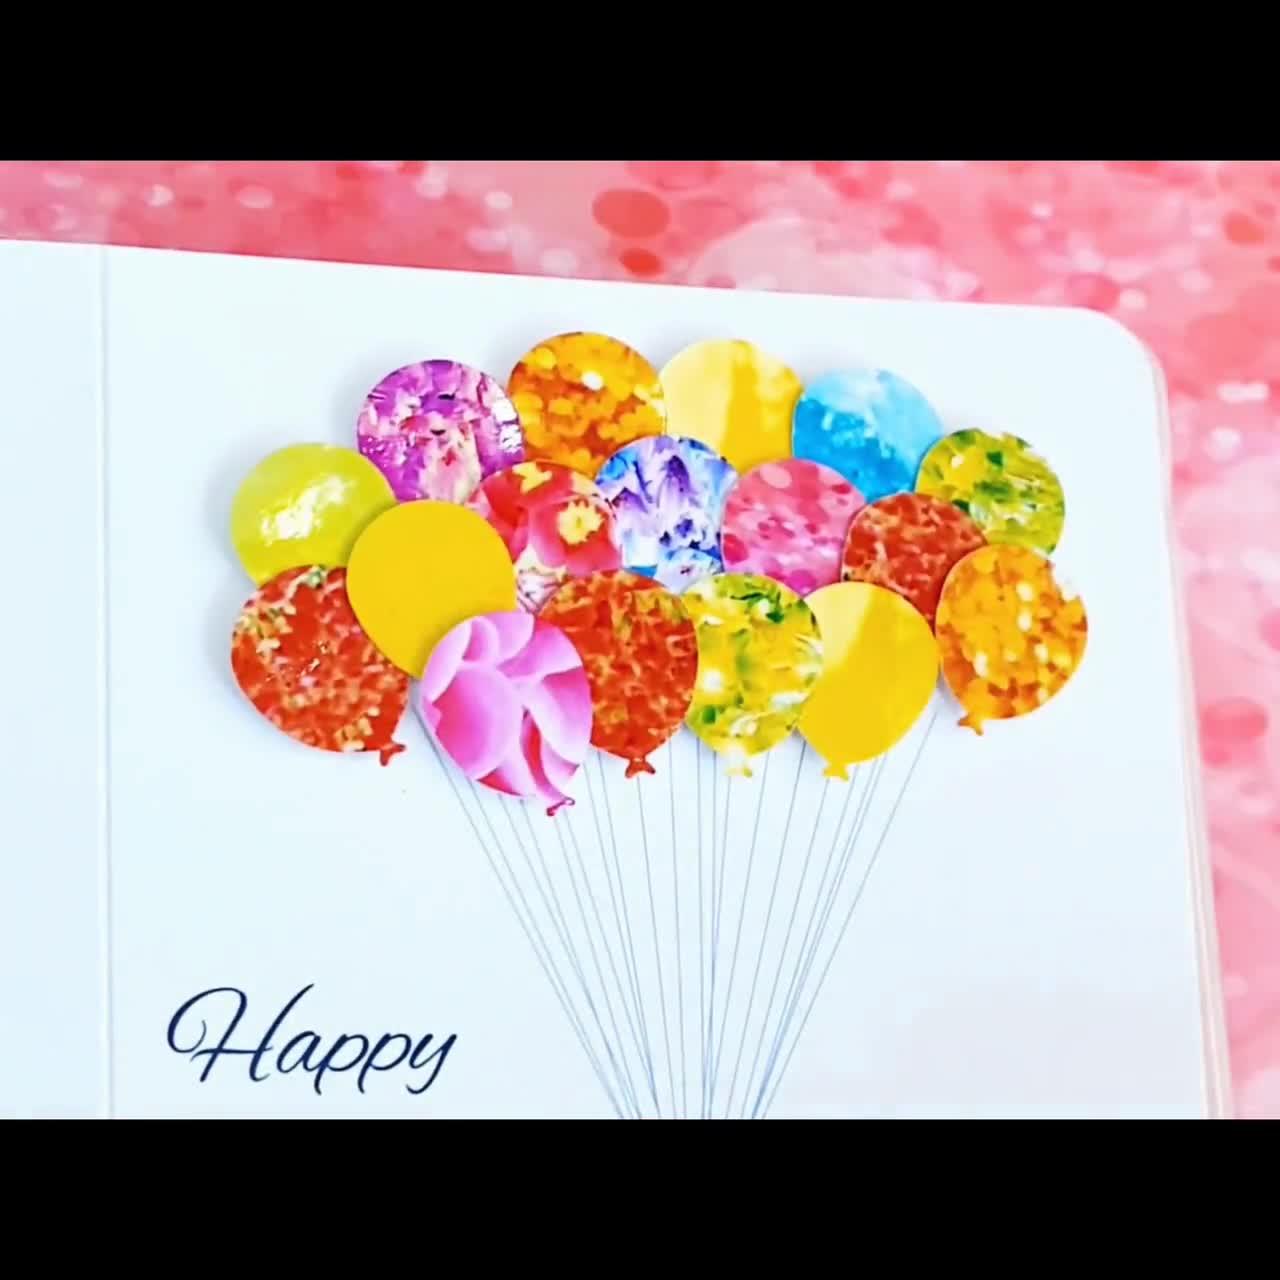 95137 six birthday mom cards with six envelopes, $1.80 for six